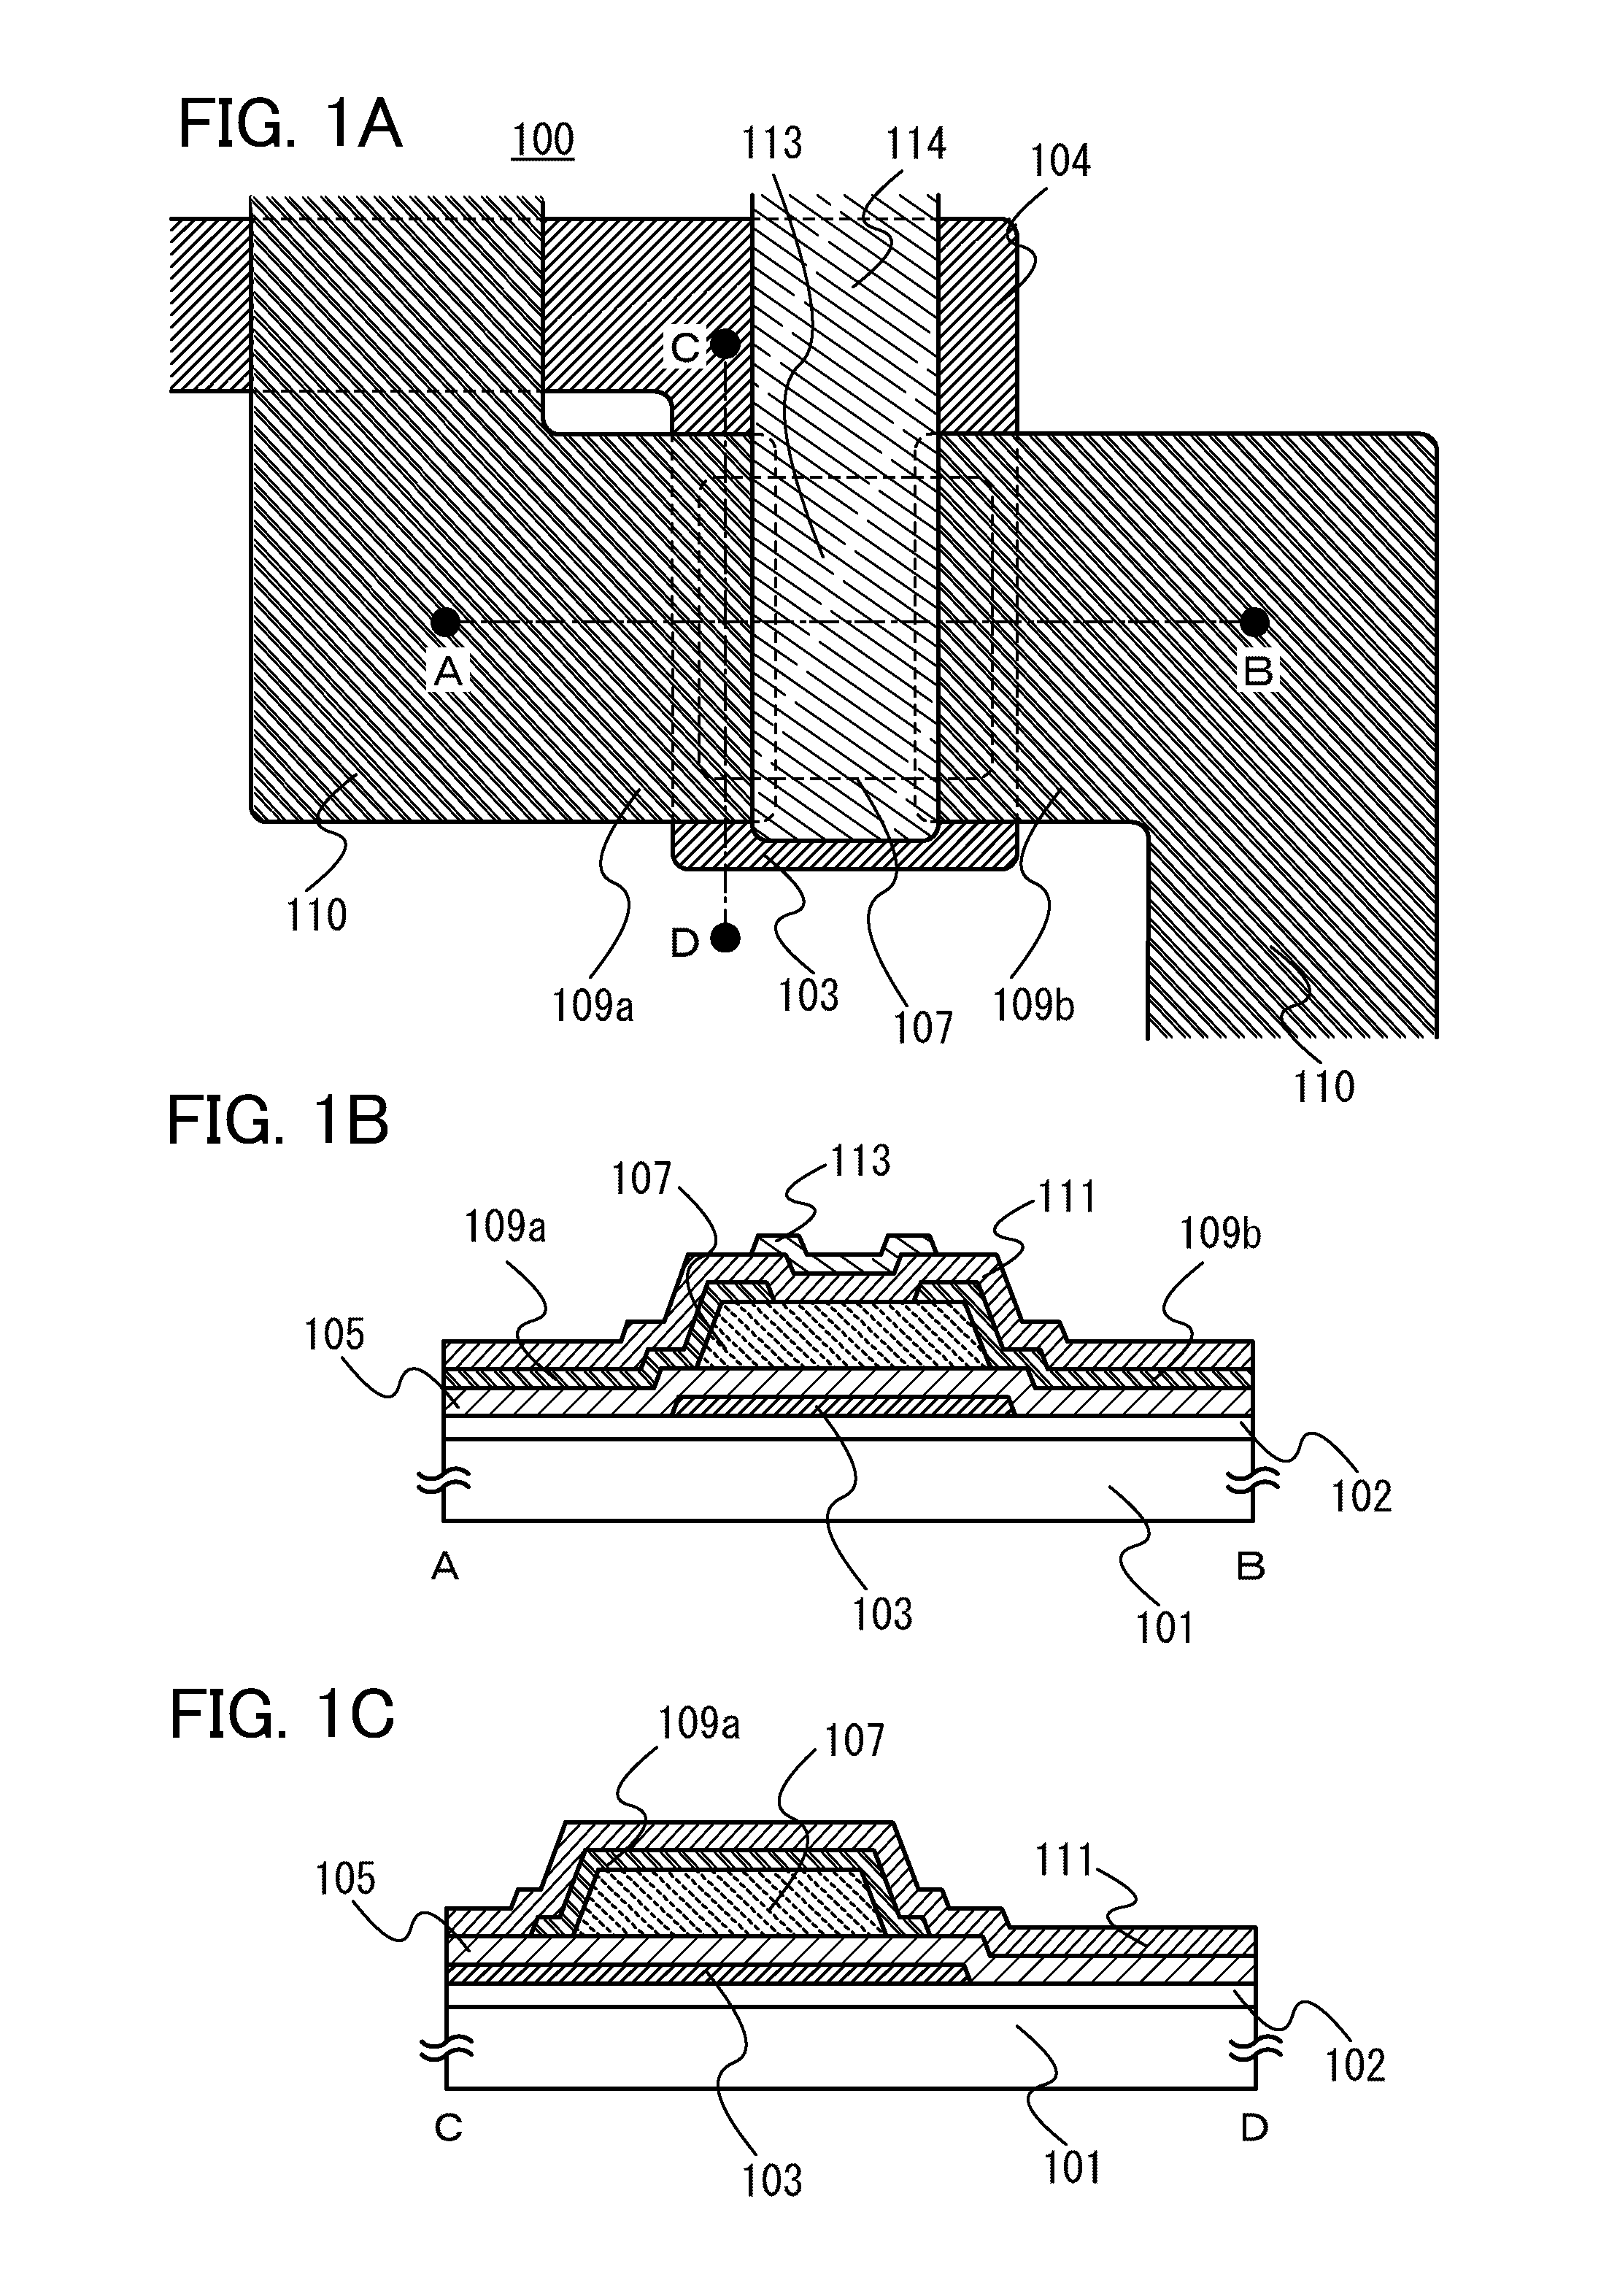 Semiconductor device, power diode, and rectifier